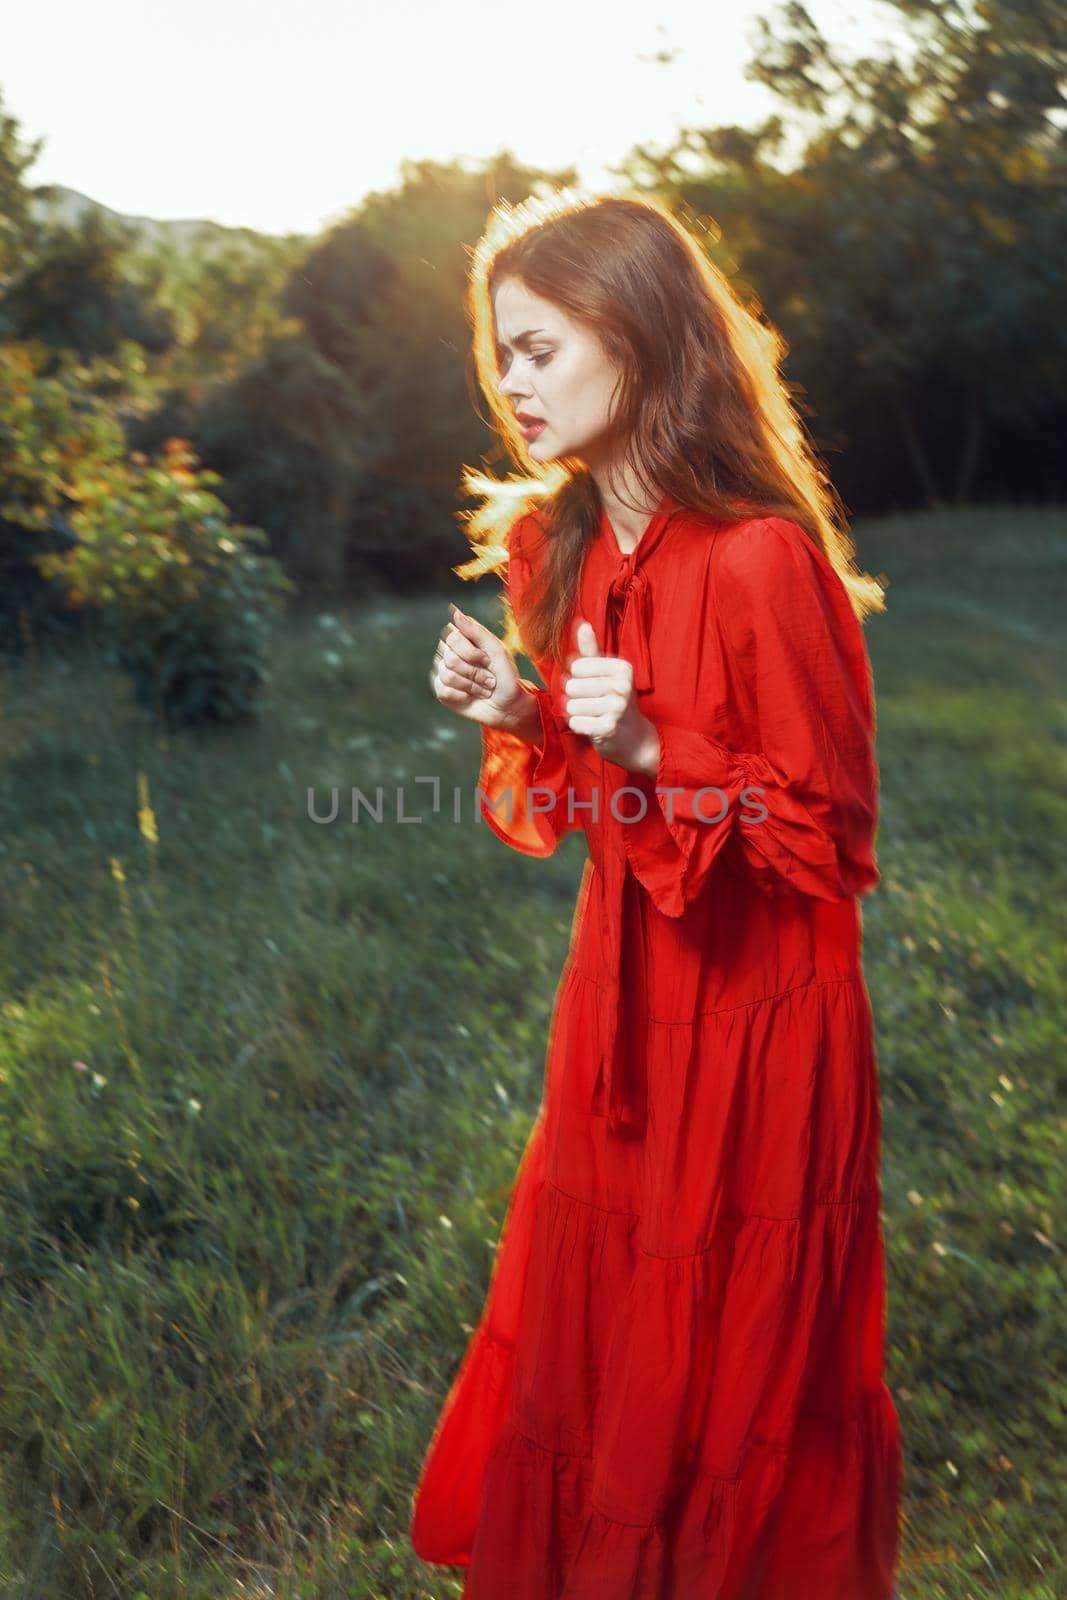 woman in red dress in field near tree posing summer. High quality photo